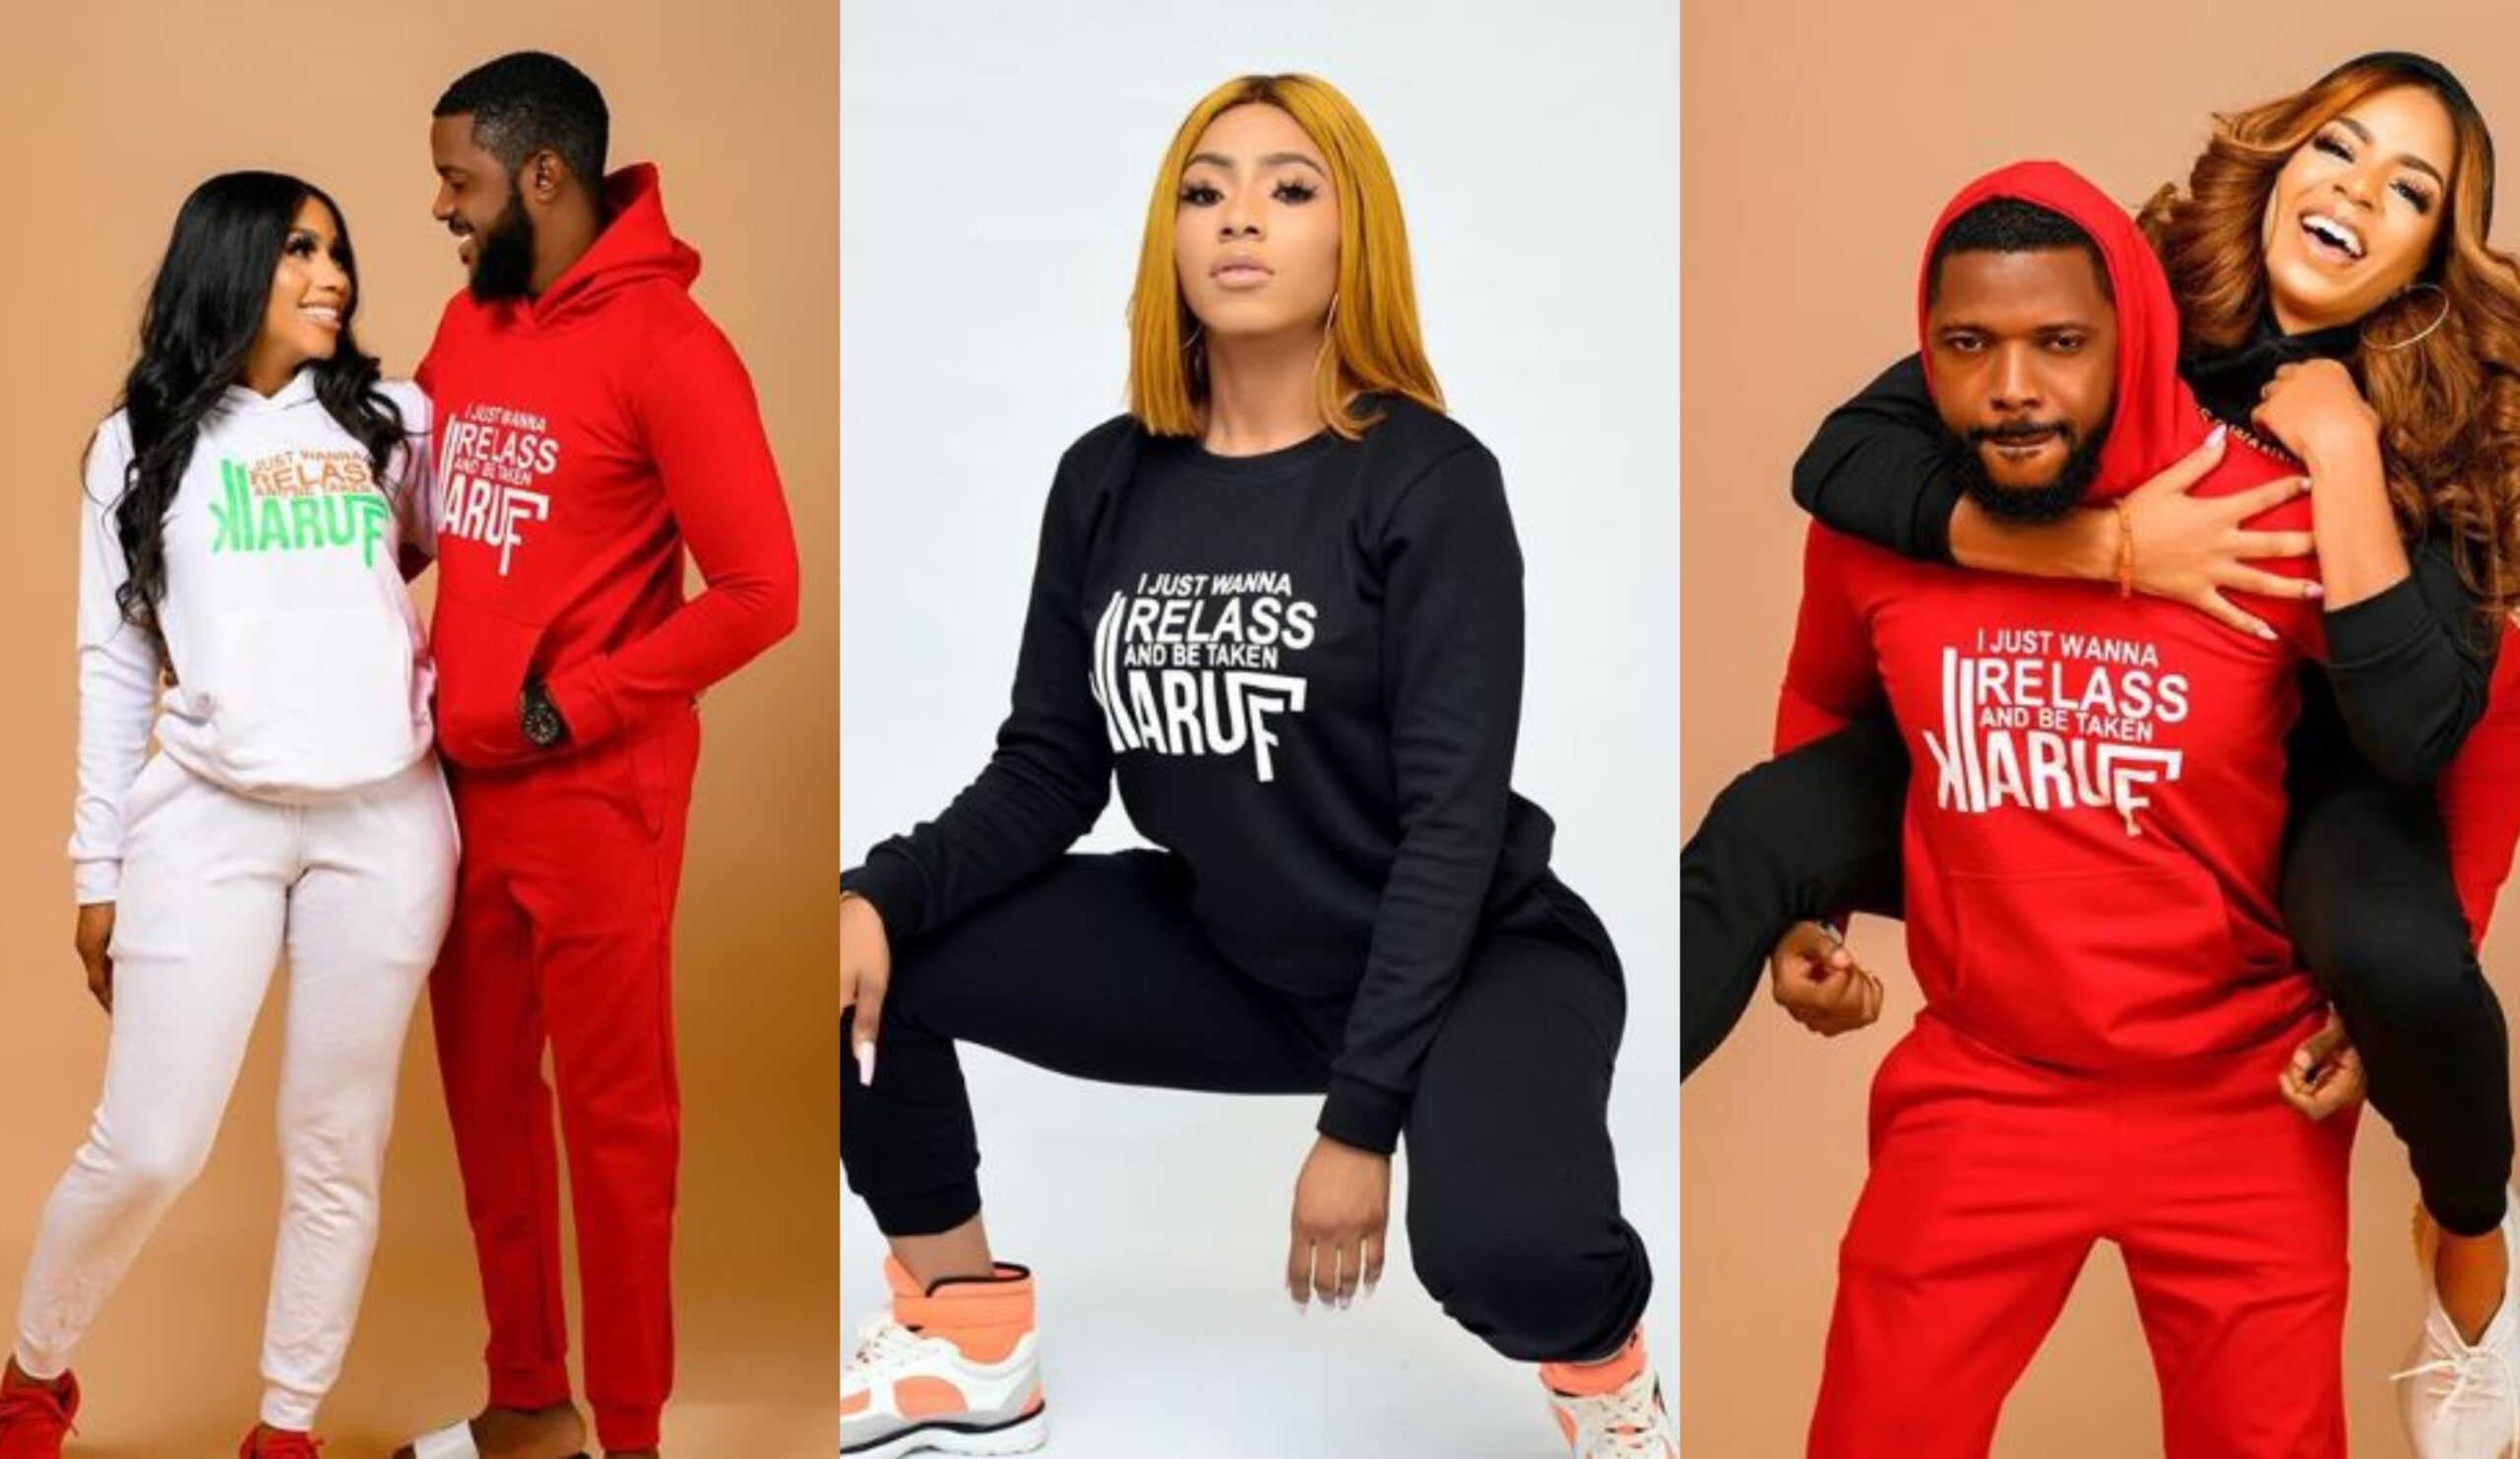 Mercy Eke launches new merch with her popular 'Relazz and be taken kiaruff' statement (Photos)